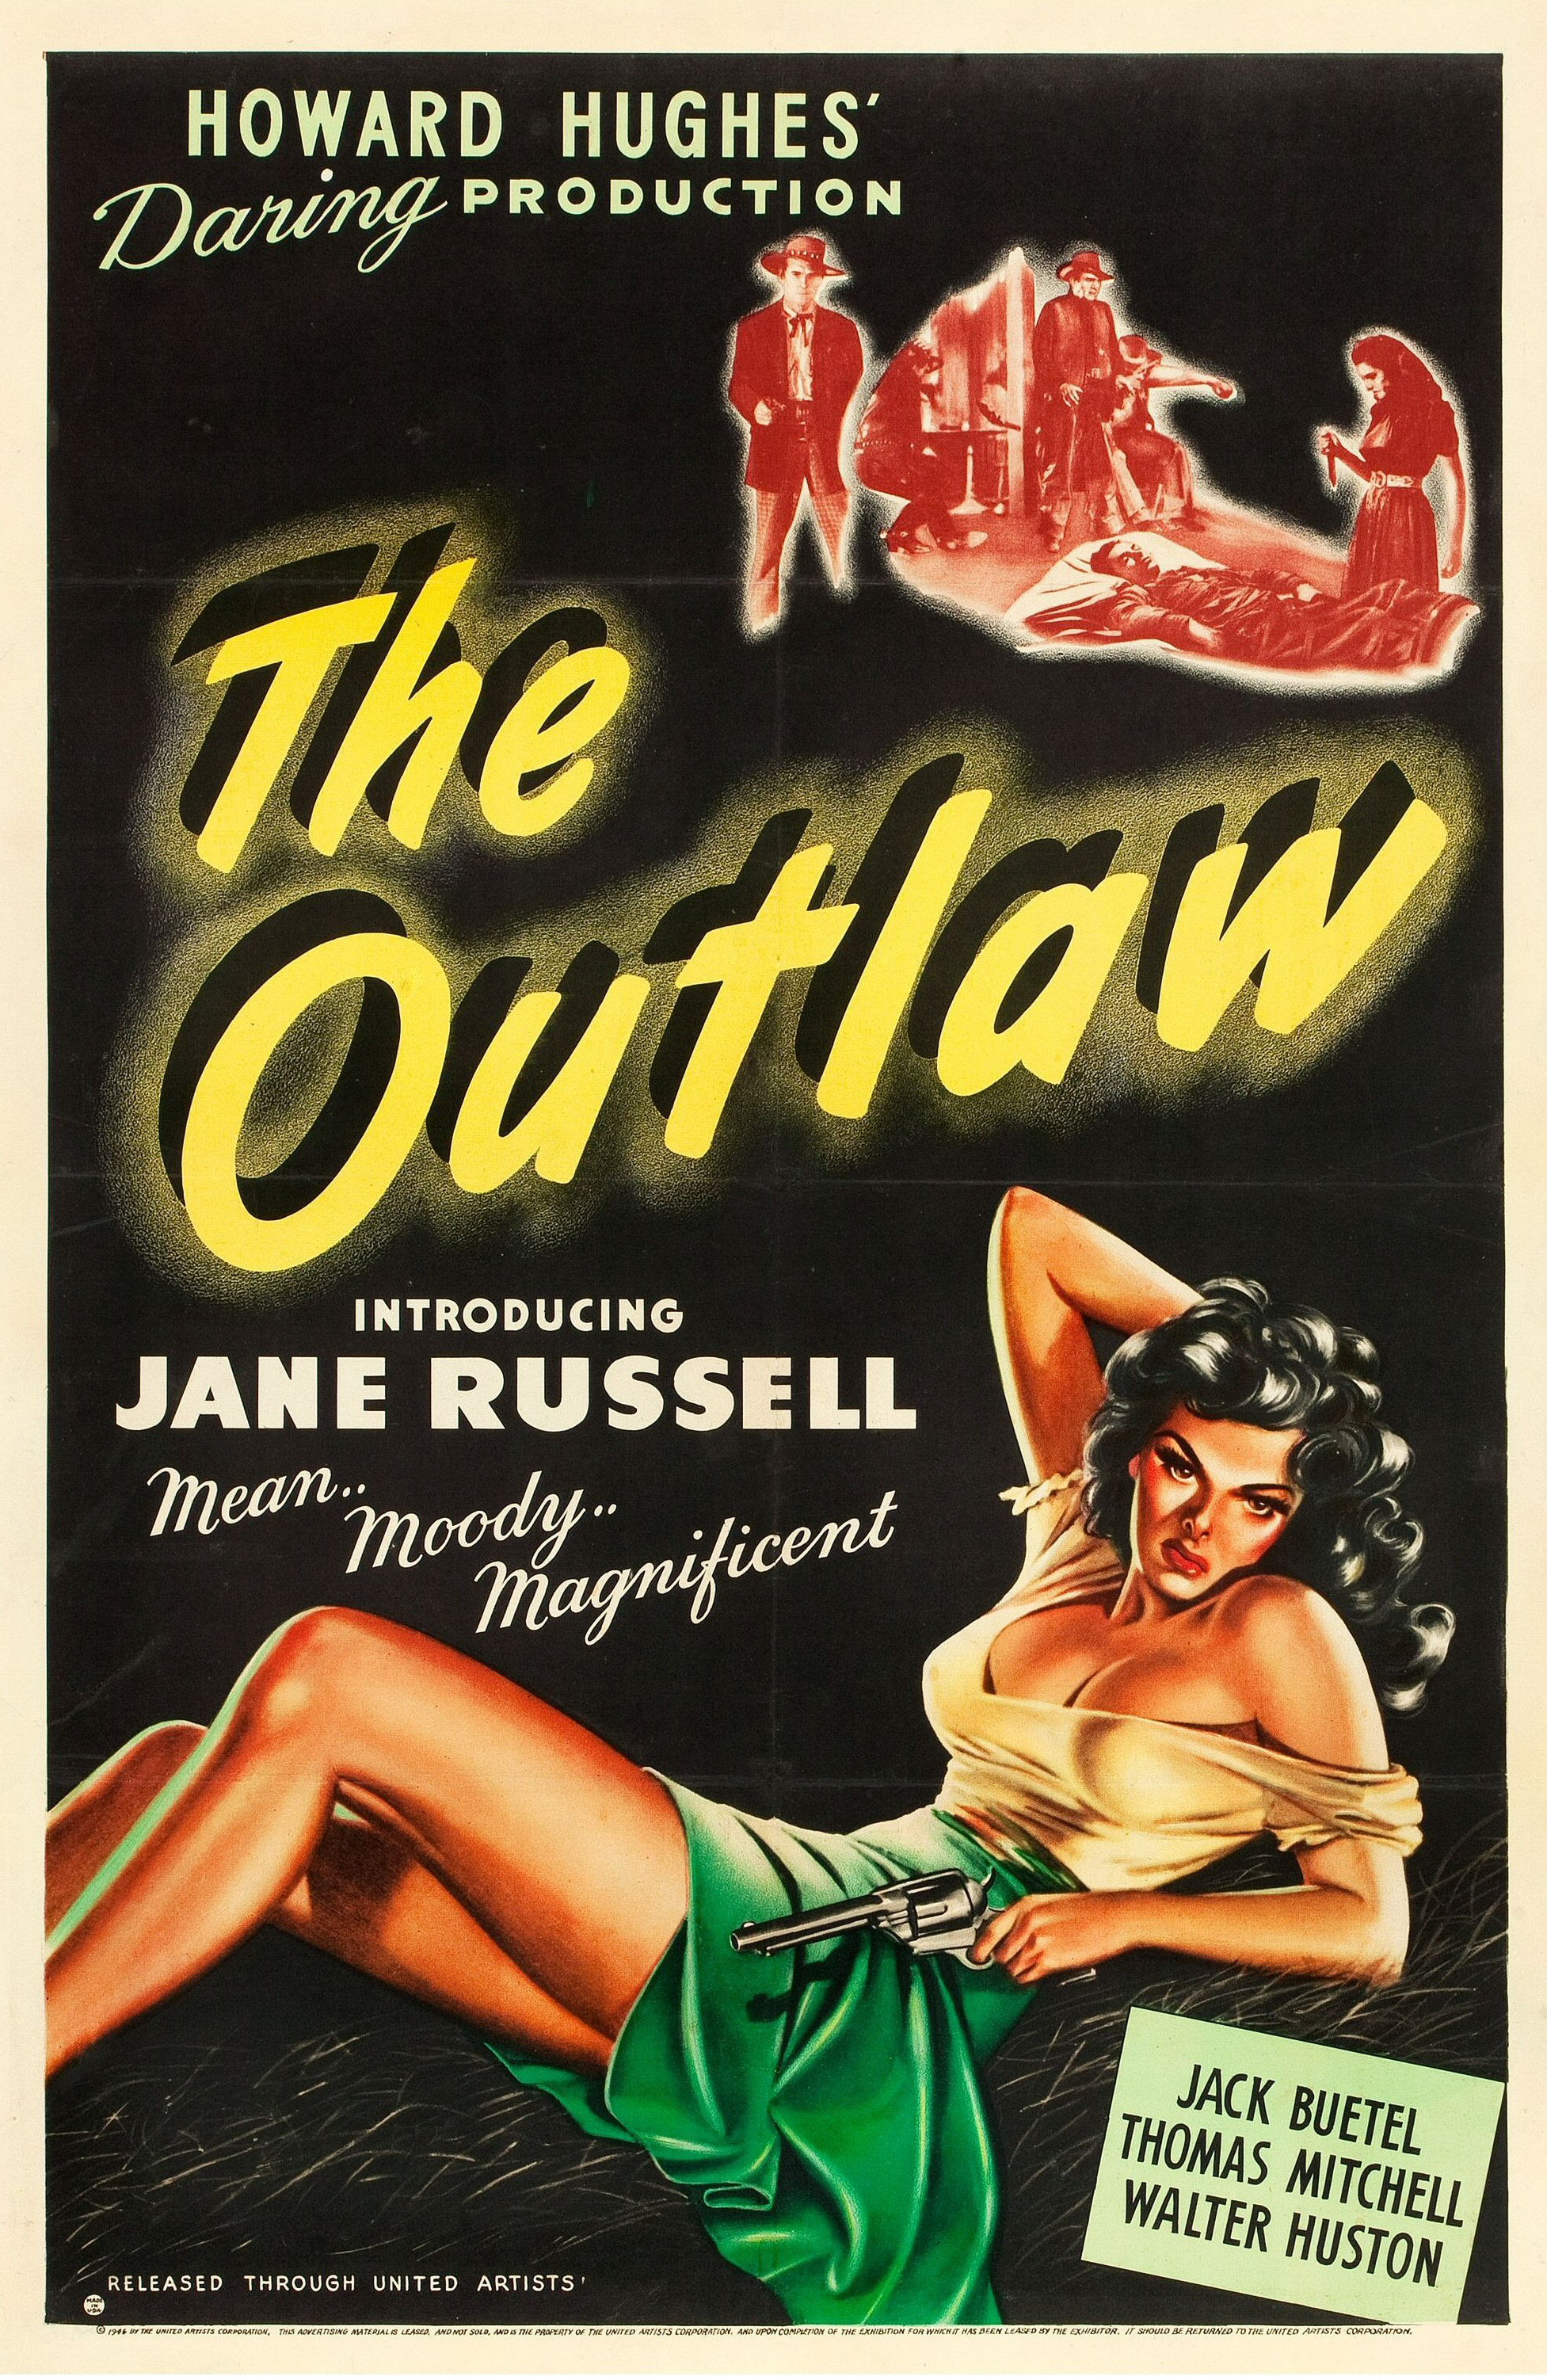 The Outlaw (1943) with English Subtitles on DVD on DVD